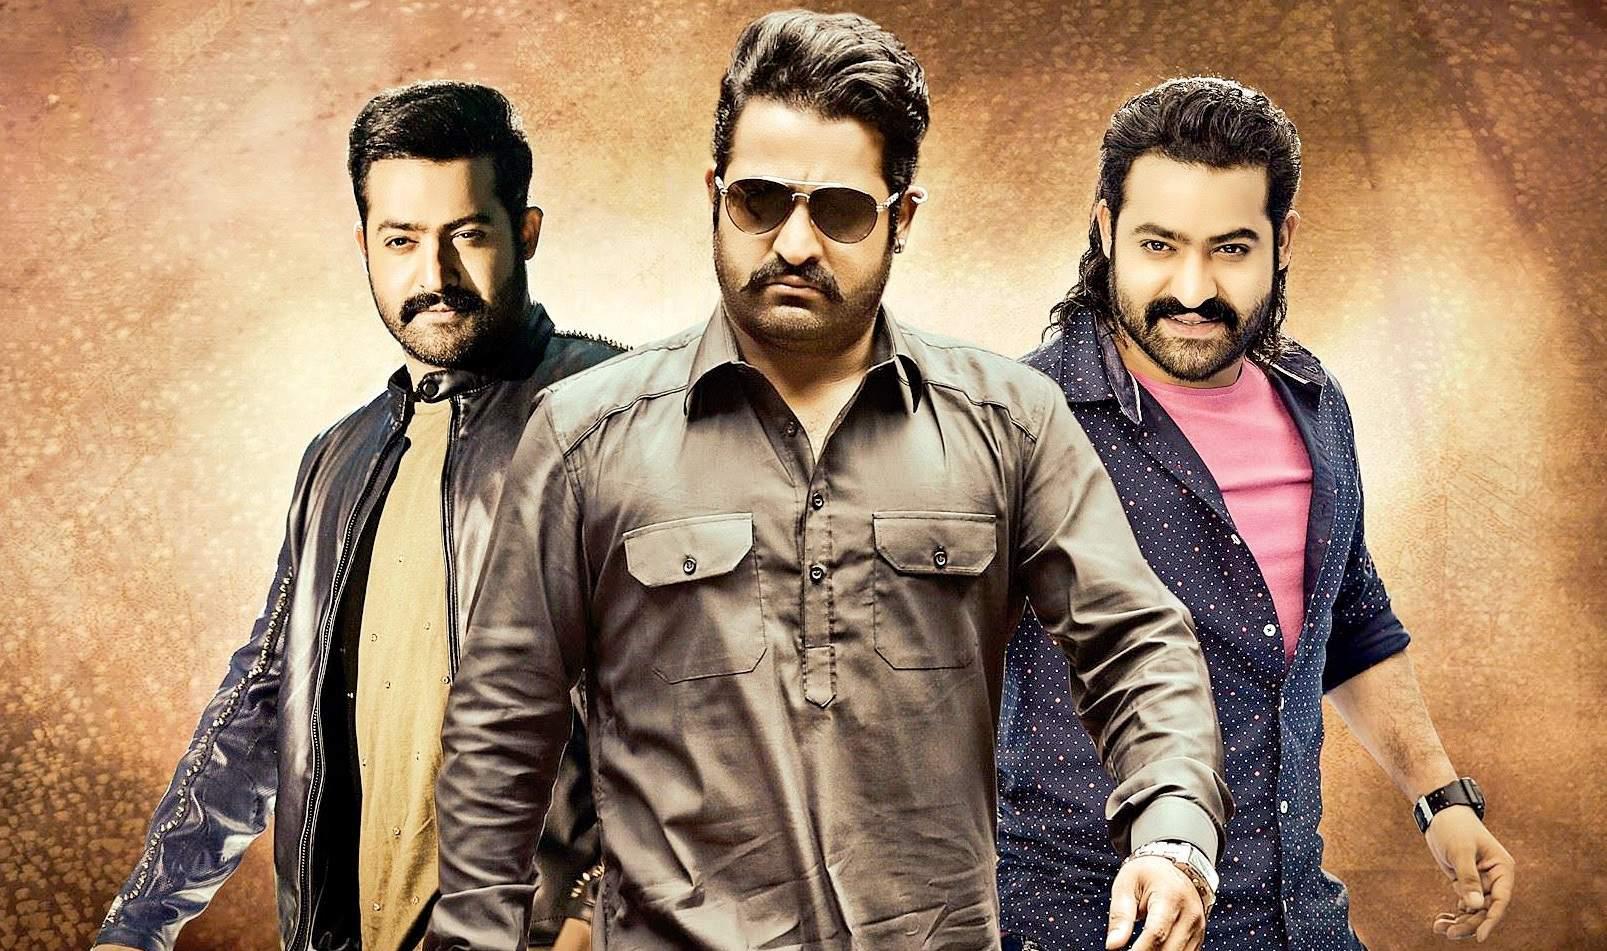 Jr NTR Wallpapers HD for Android - APK Download